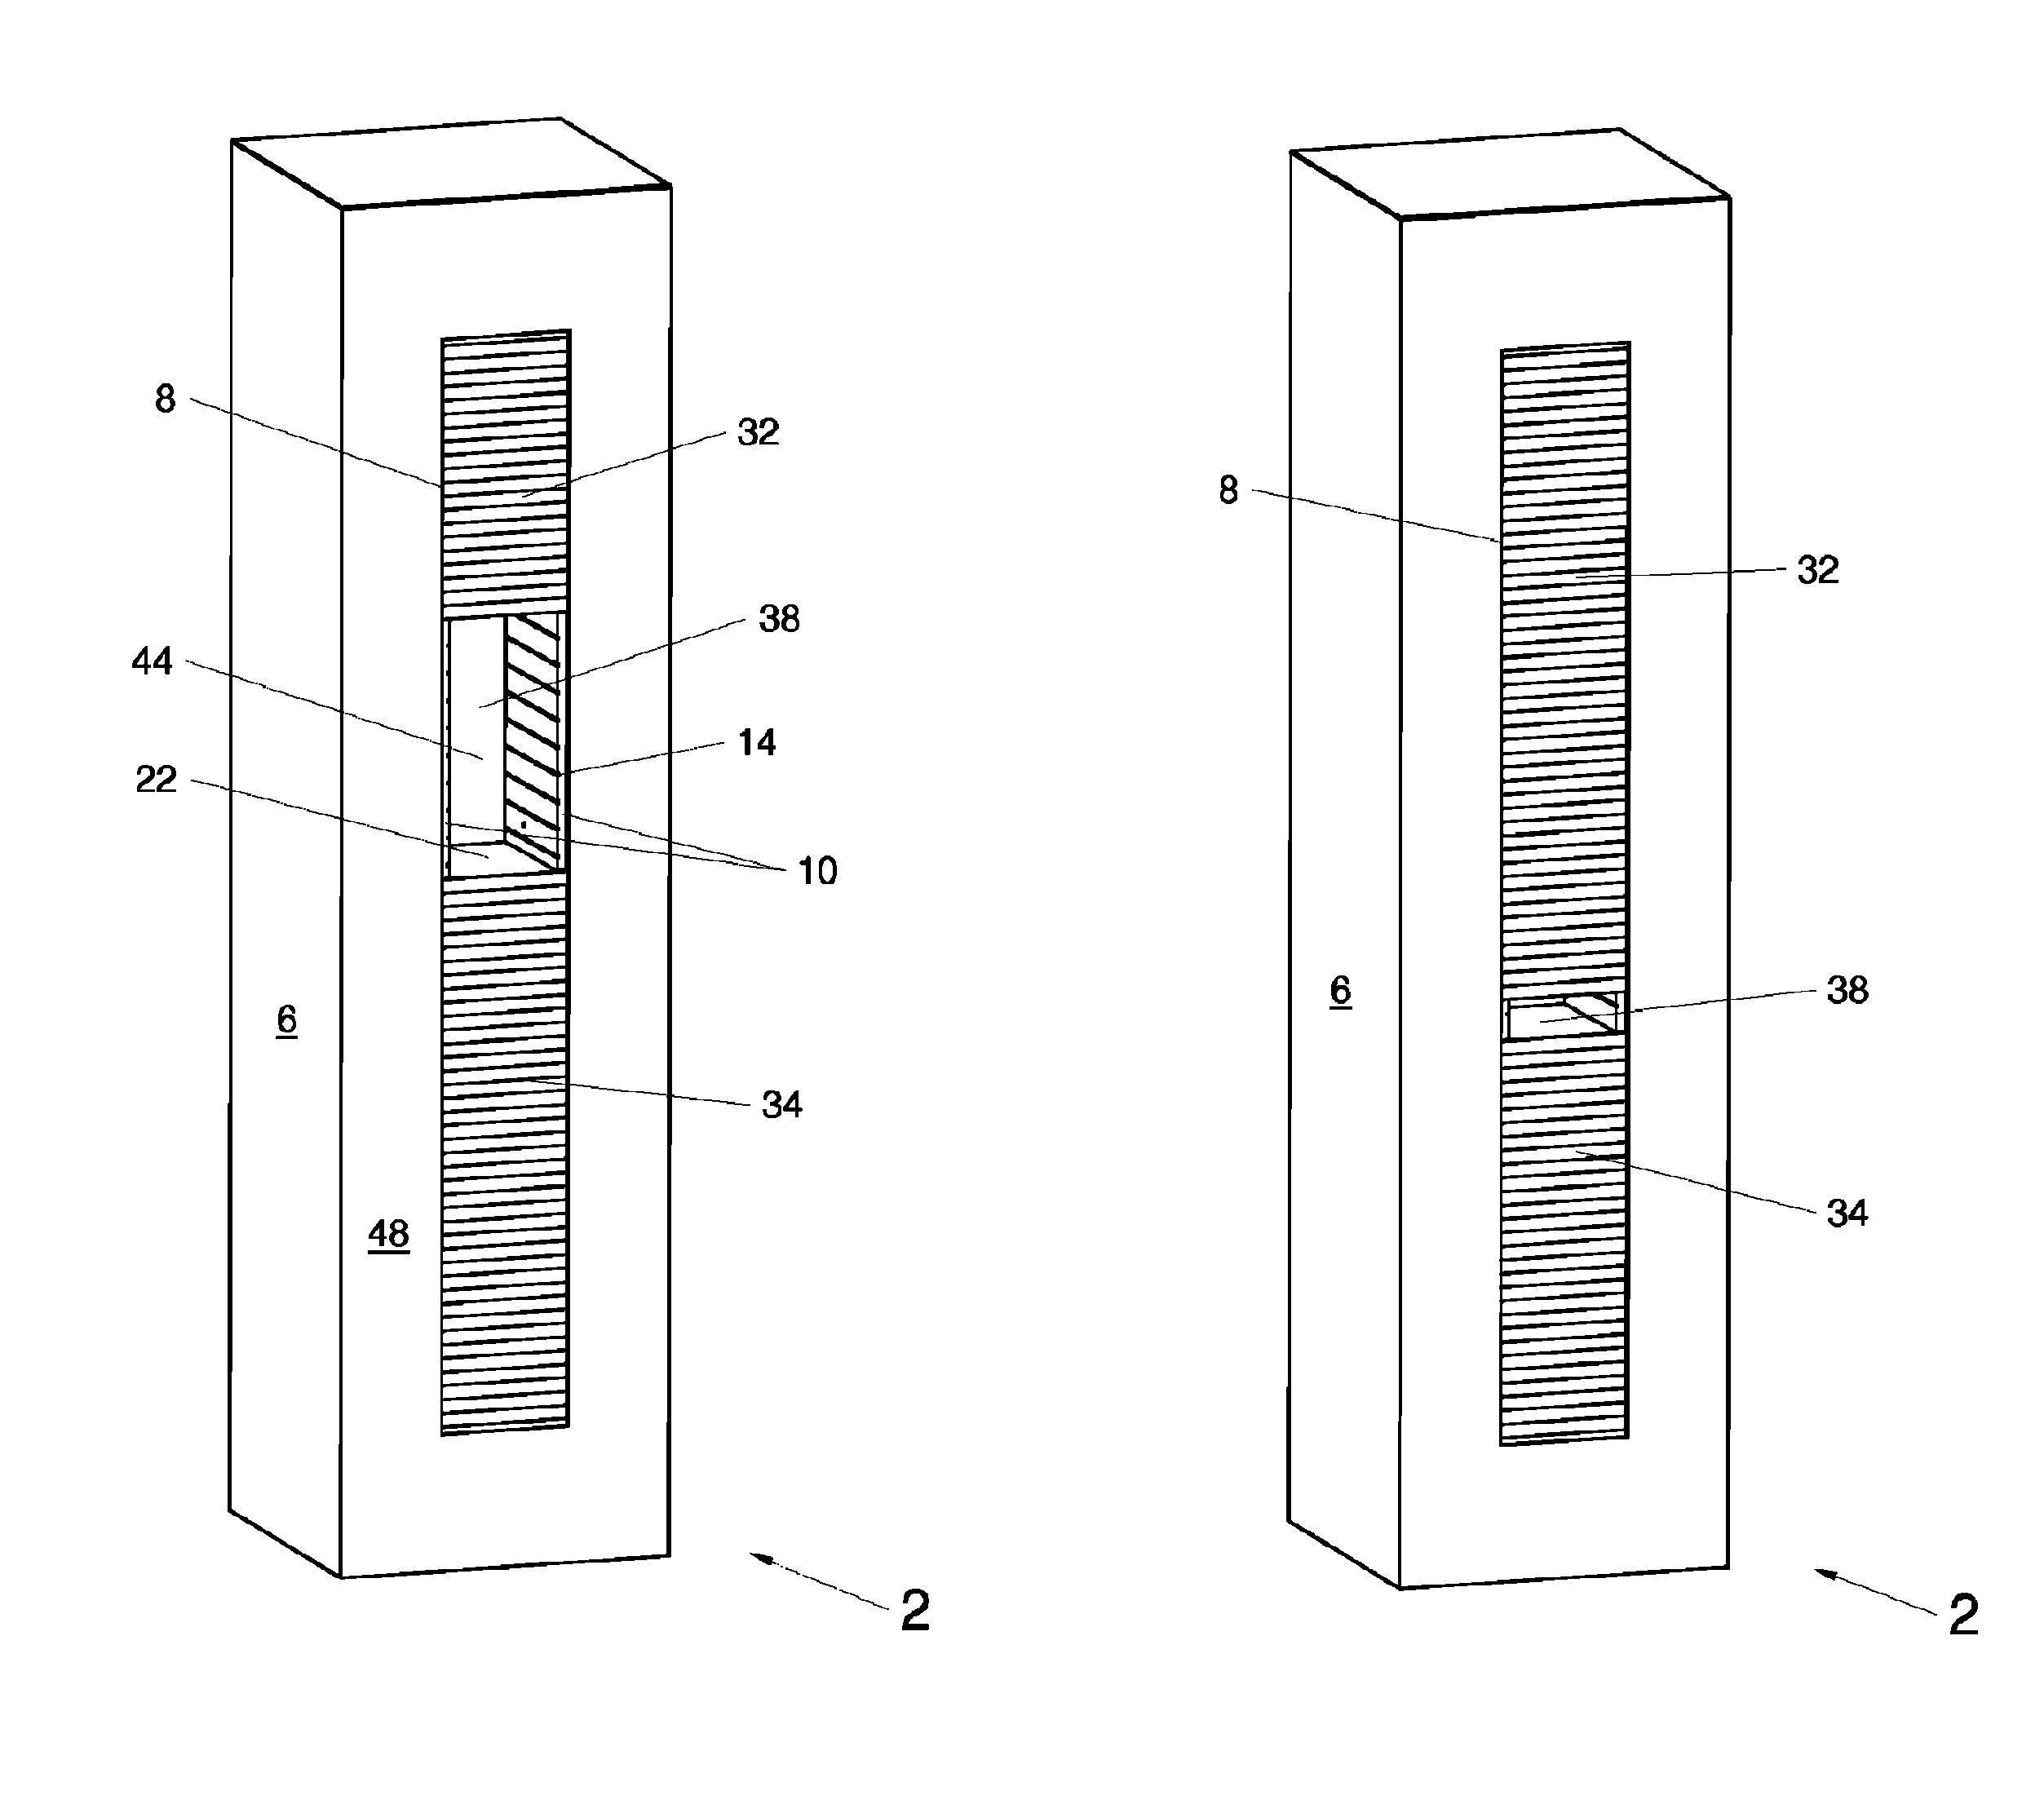 Storage and retrieval machine with variable-height door opening